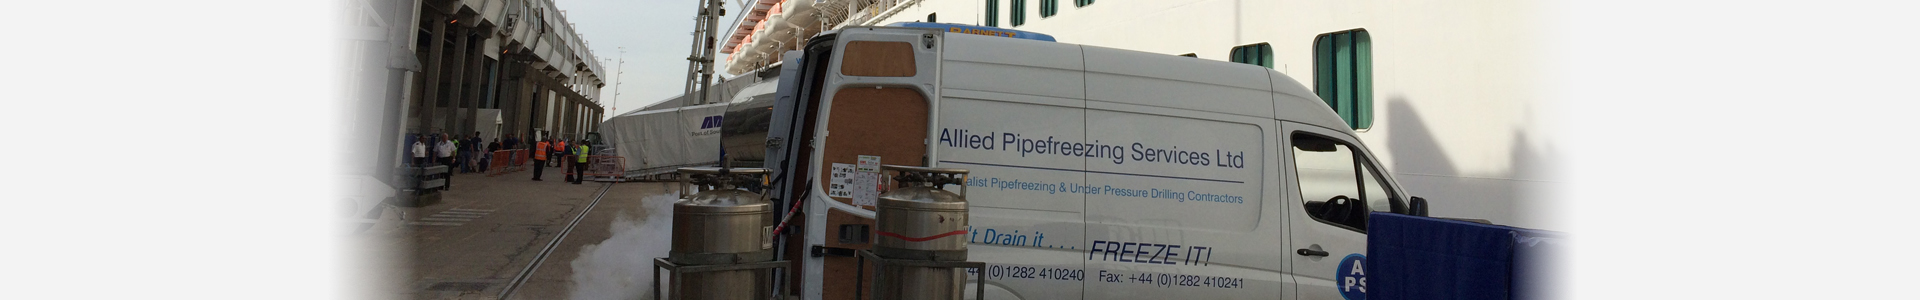 allied-pipe-freezing-services-ltd-case-study-single-page